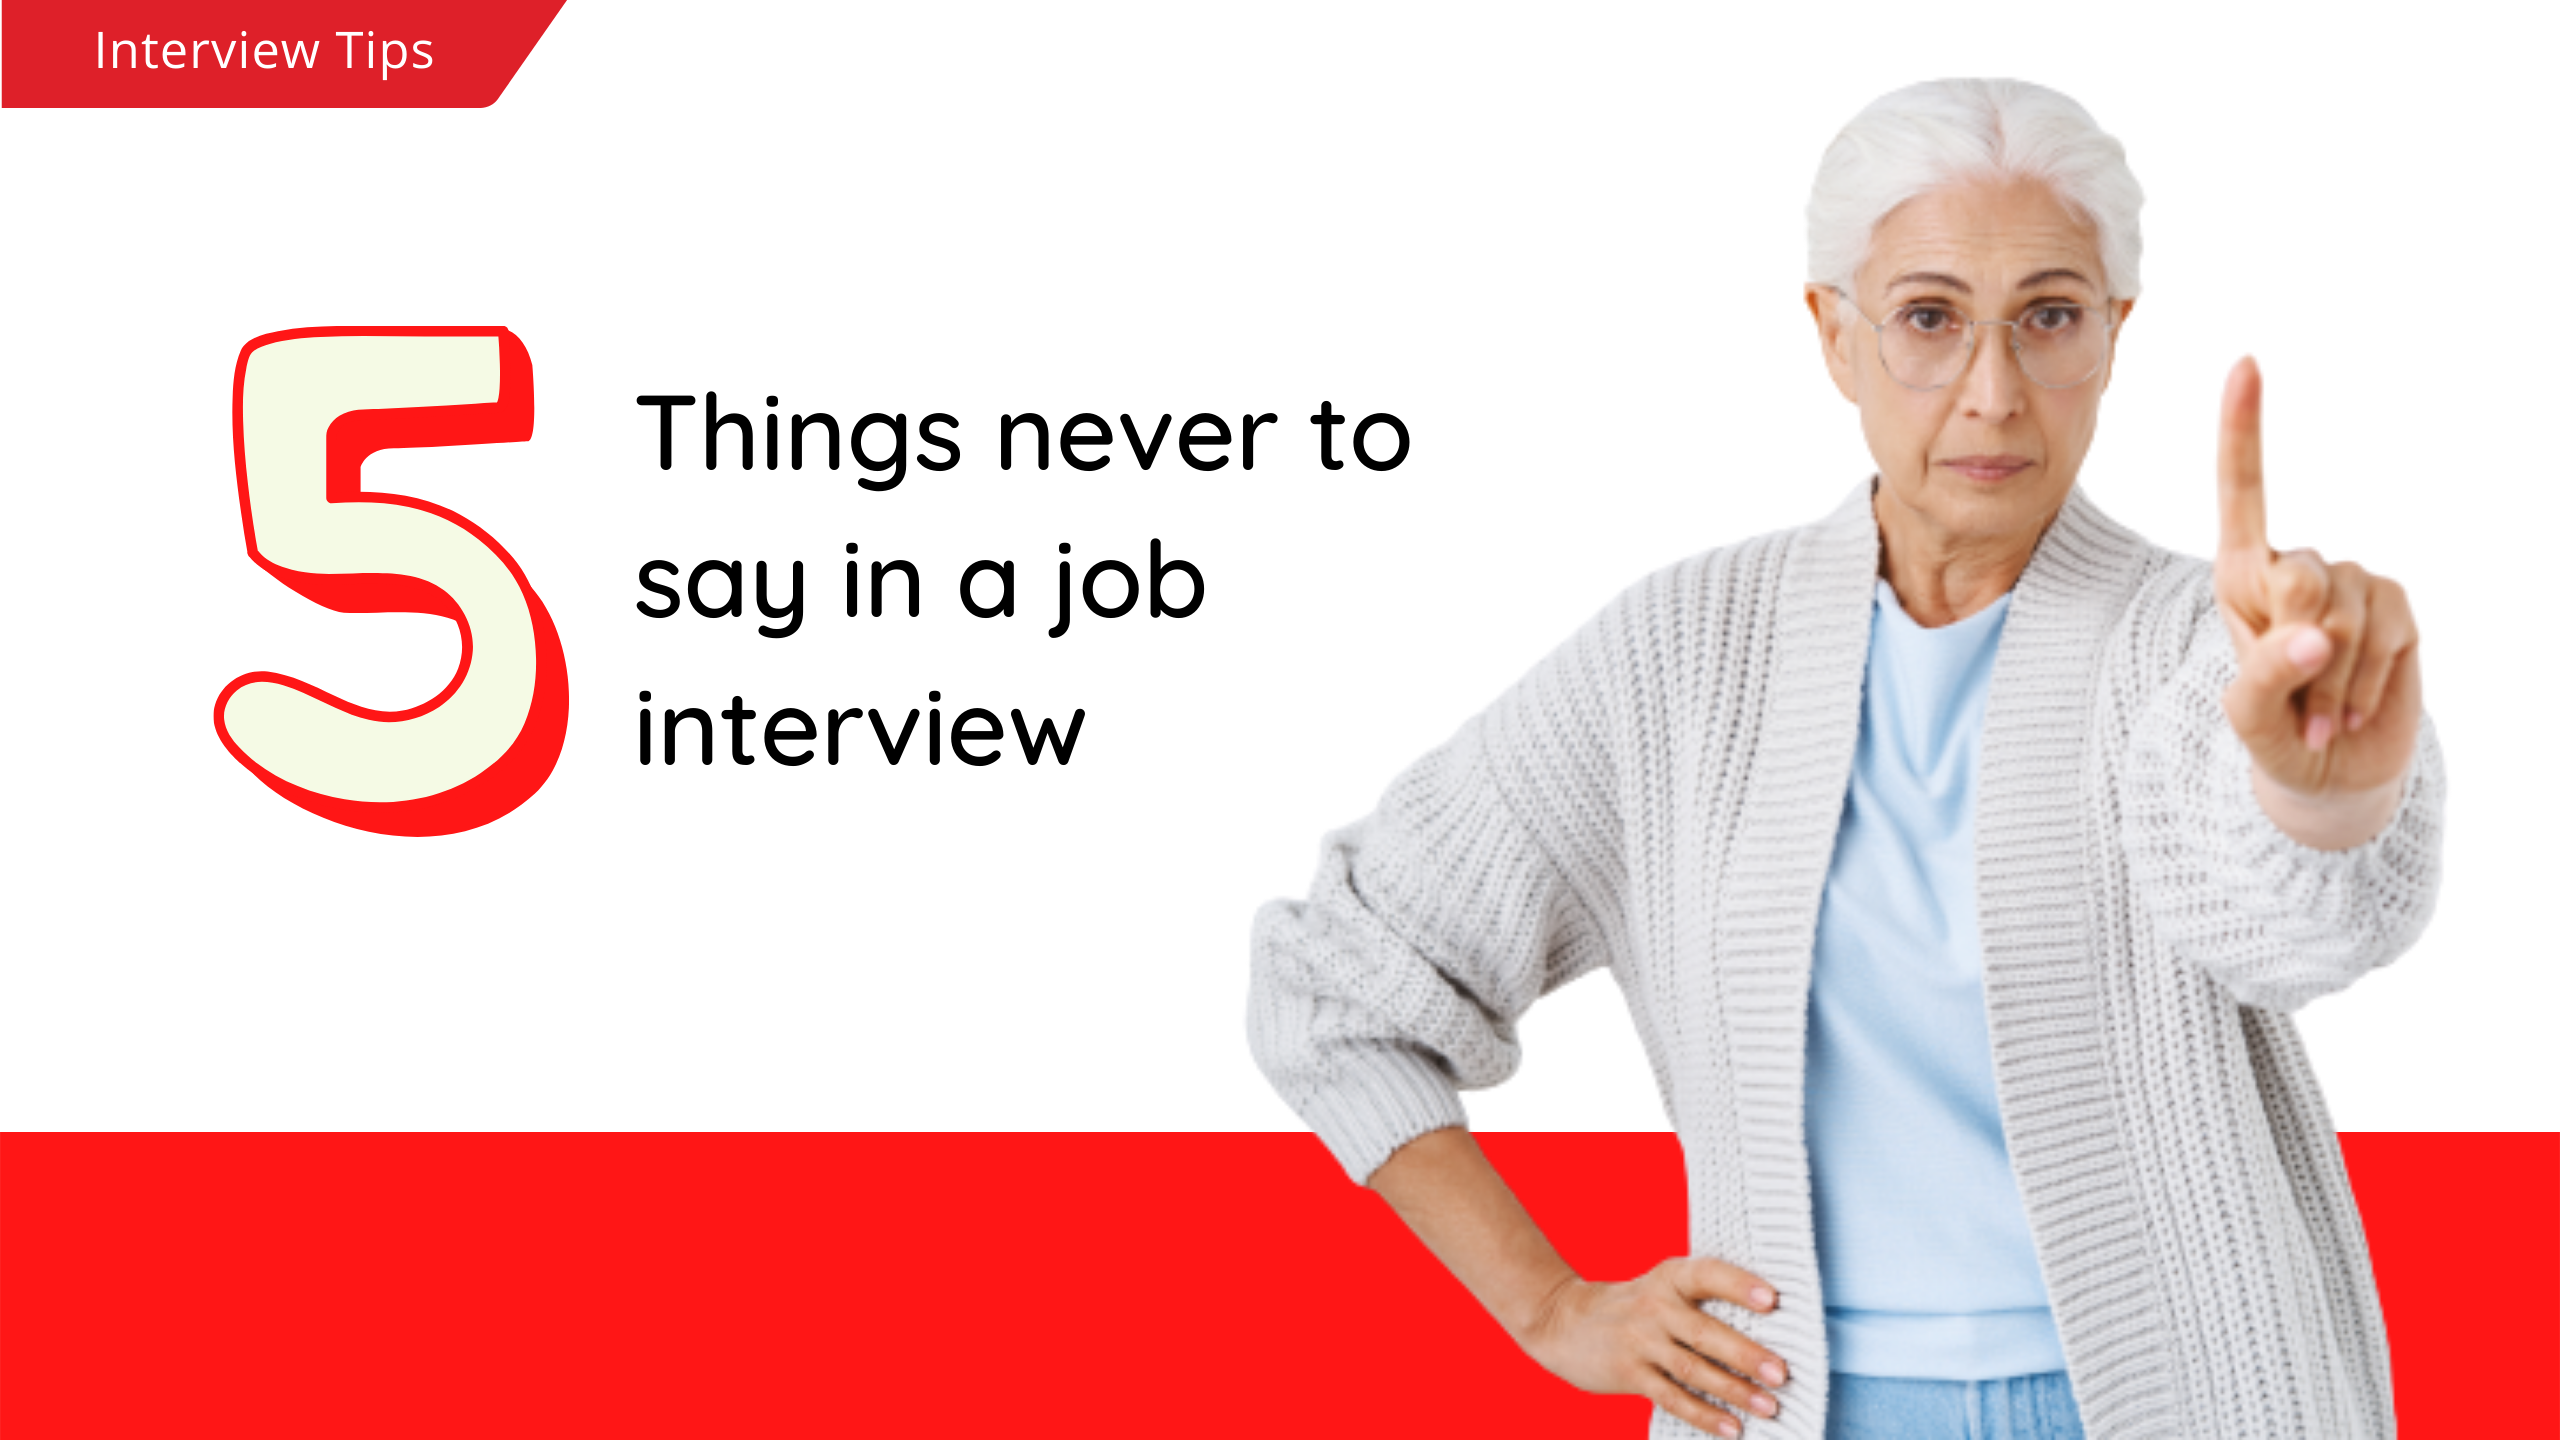 Did you know that knowing what not to say is just as important as knowing what to say in a job interview? Below are some things you should never say.